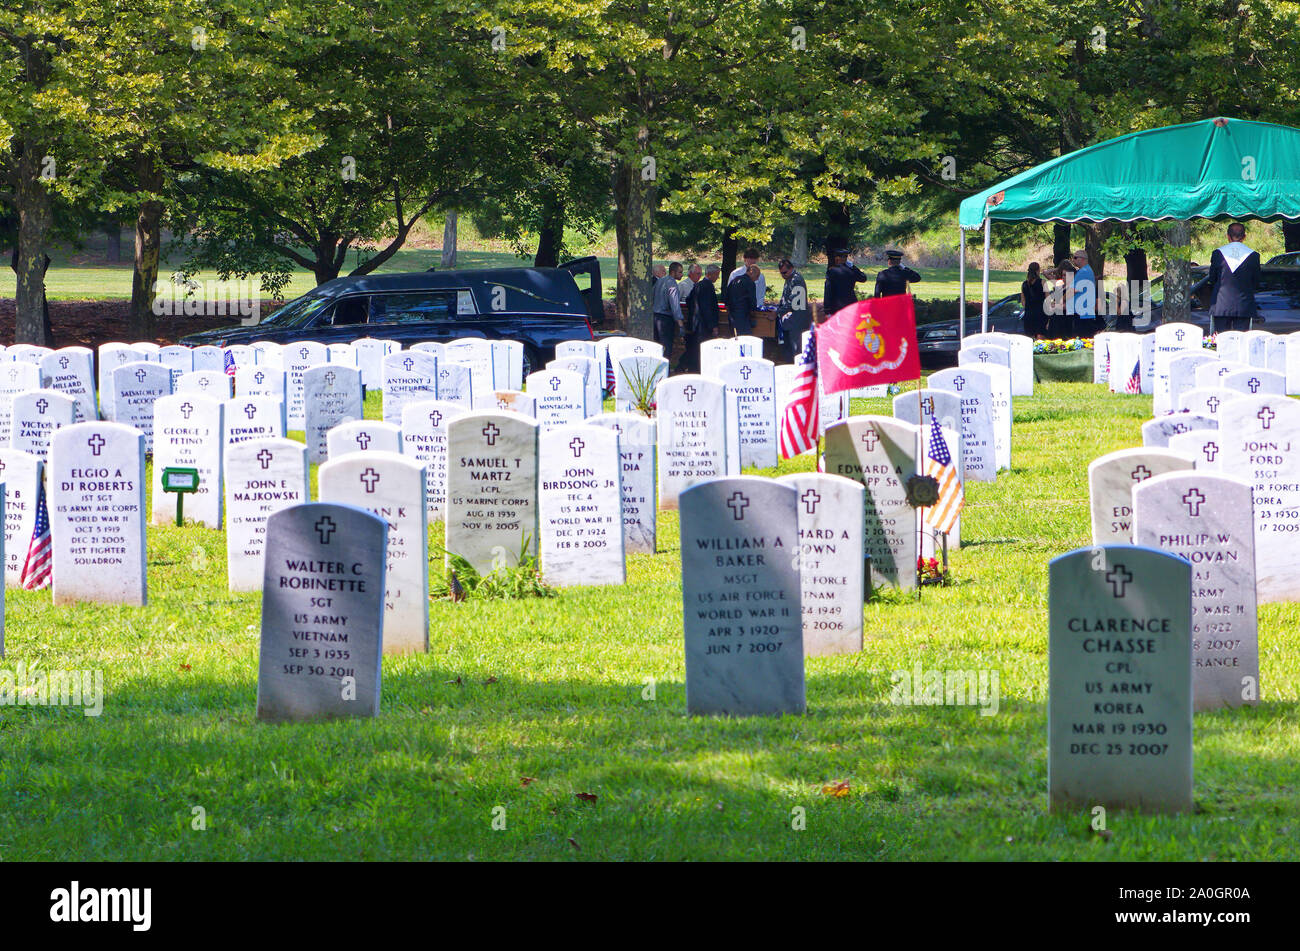 Middletown, CT USA. Aug 2013. Departed veteran being laid to rest with full military honors at one of the many State Veterans cemeteries nationwide. Stock Photo